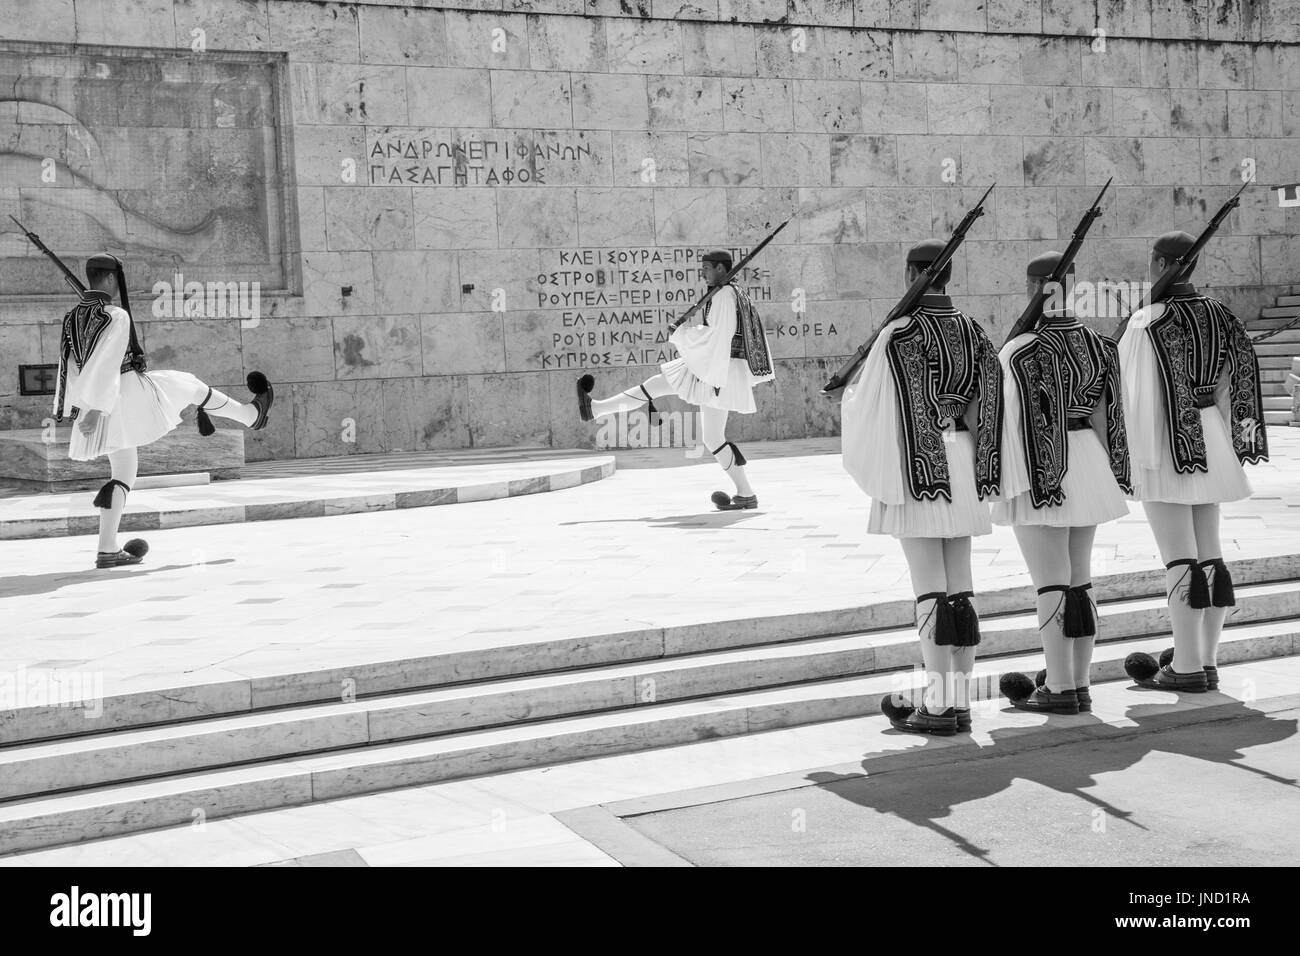 Athens, Greece, - April 05, 2015: A solemn military parade of soldiers  wearing traditional  uniforms going down the streets of Athens Stock Photo